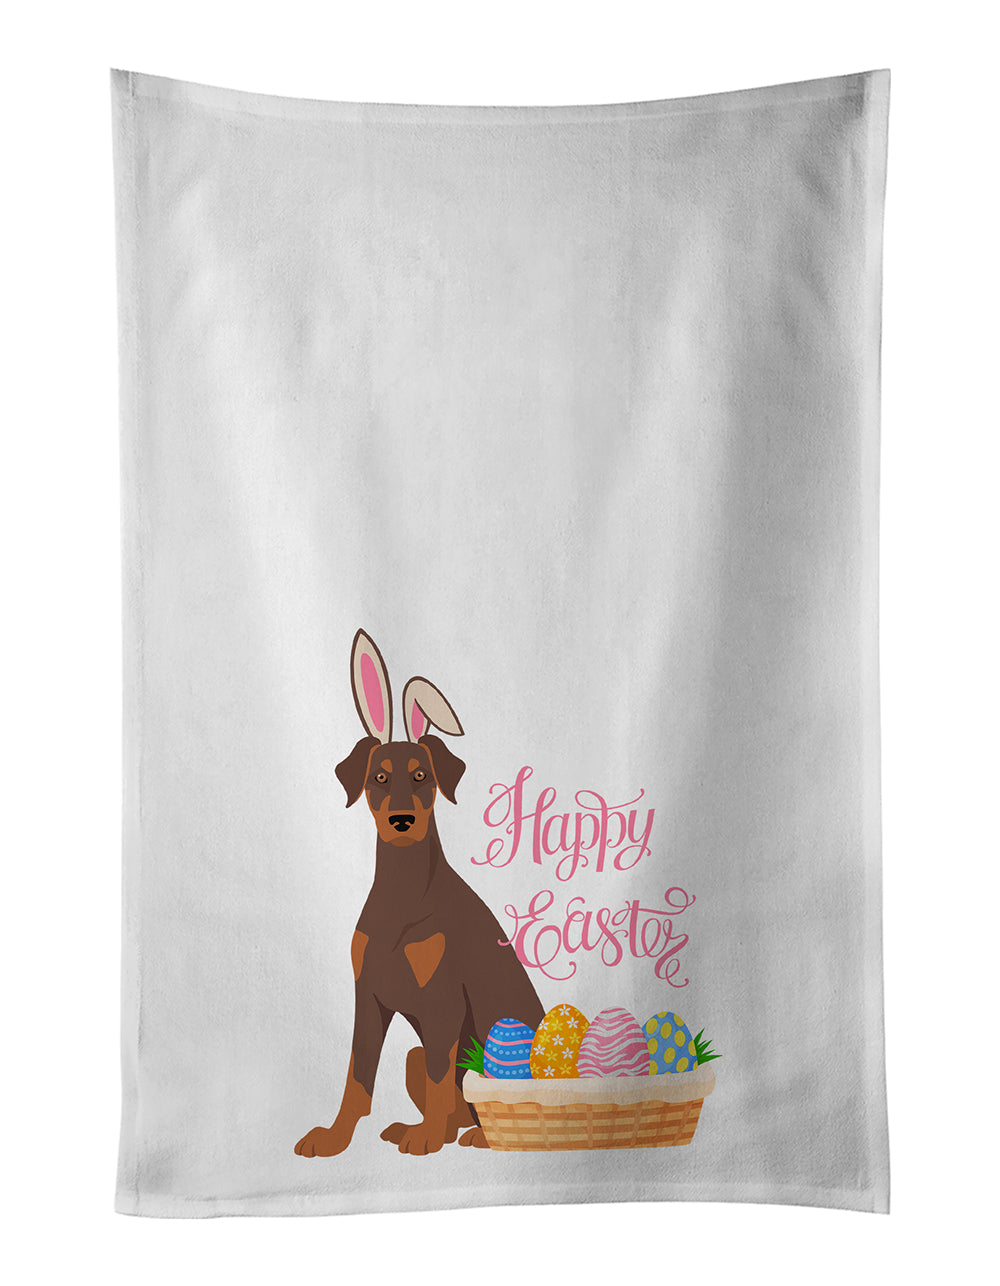 Buy this Natural Ear Red and Tan Doberman Pinscher Easter White Kitchen Towel Set of 2 Dish Towels